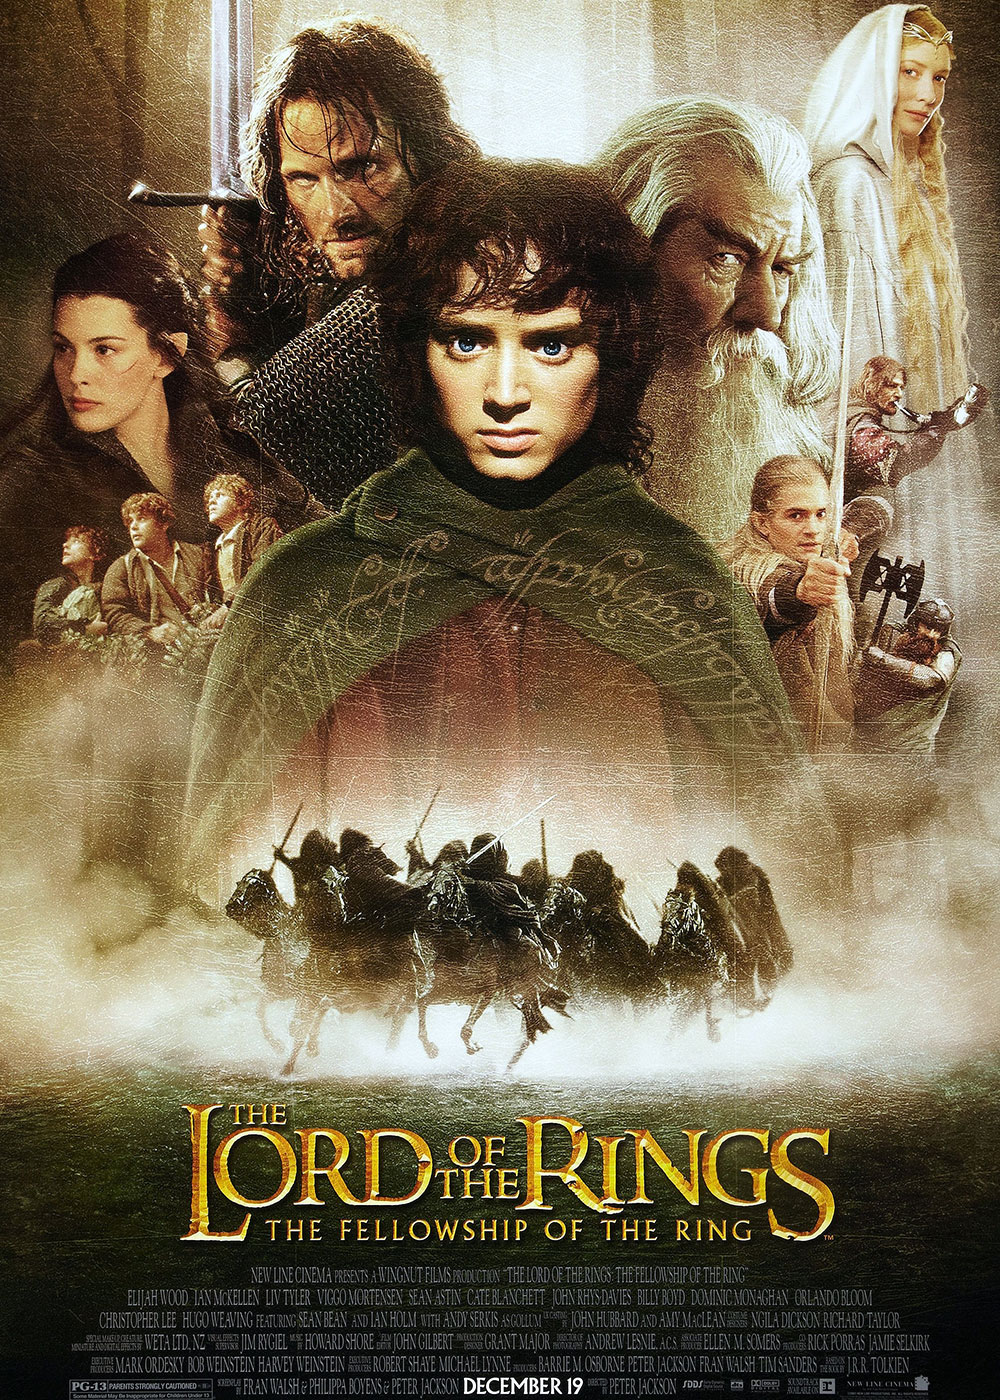 The Lord Of The Rings: The Return Of The King (2003) English Movie: Watch  Full HD Movie Online On JioCinema